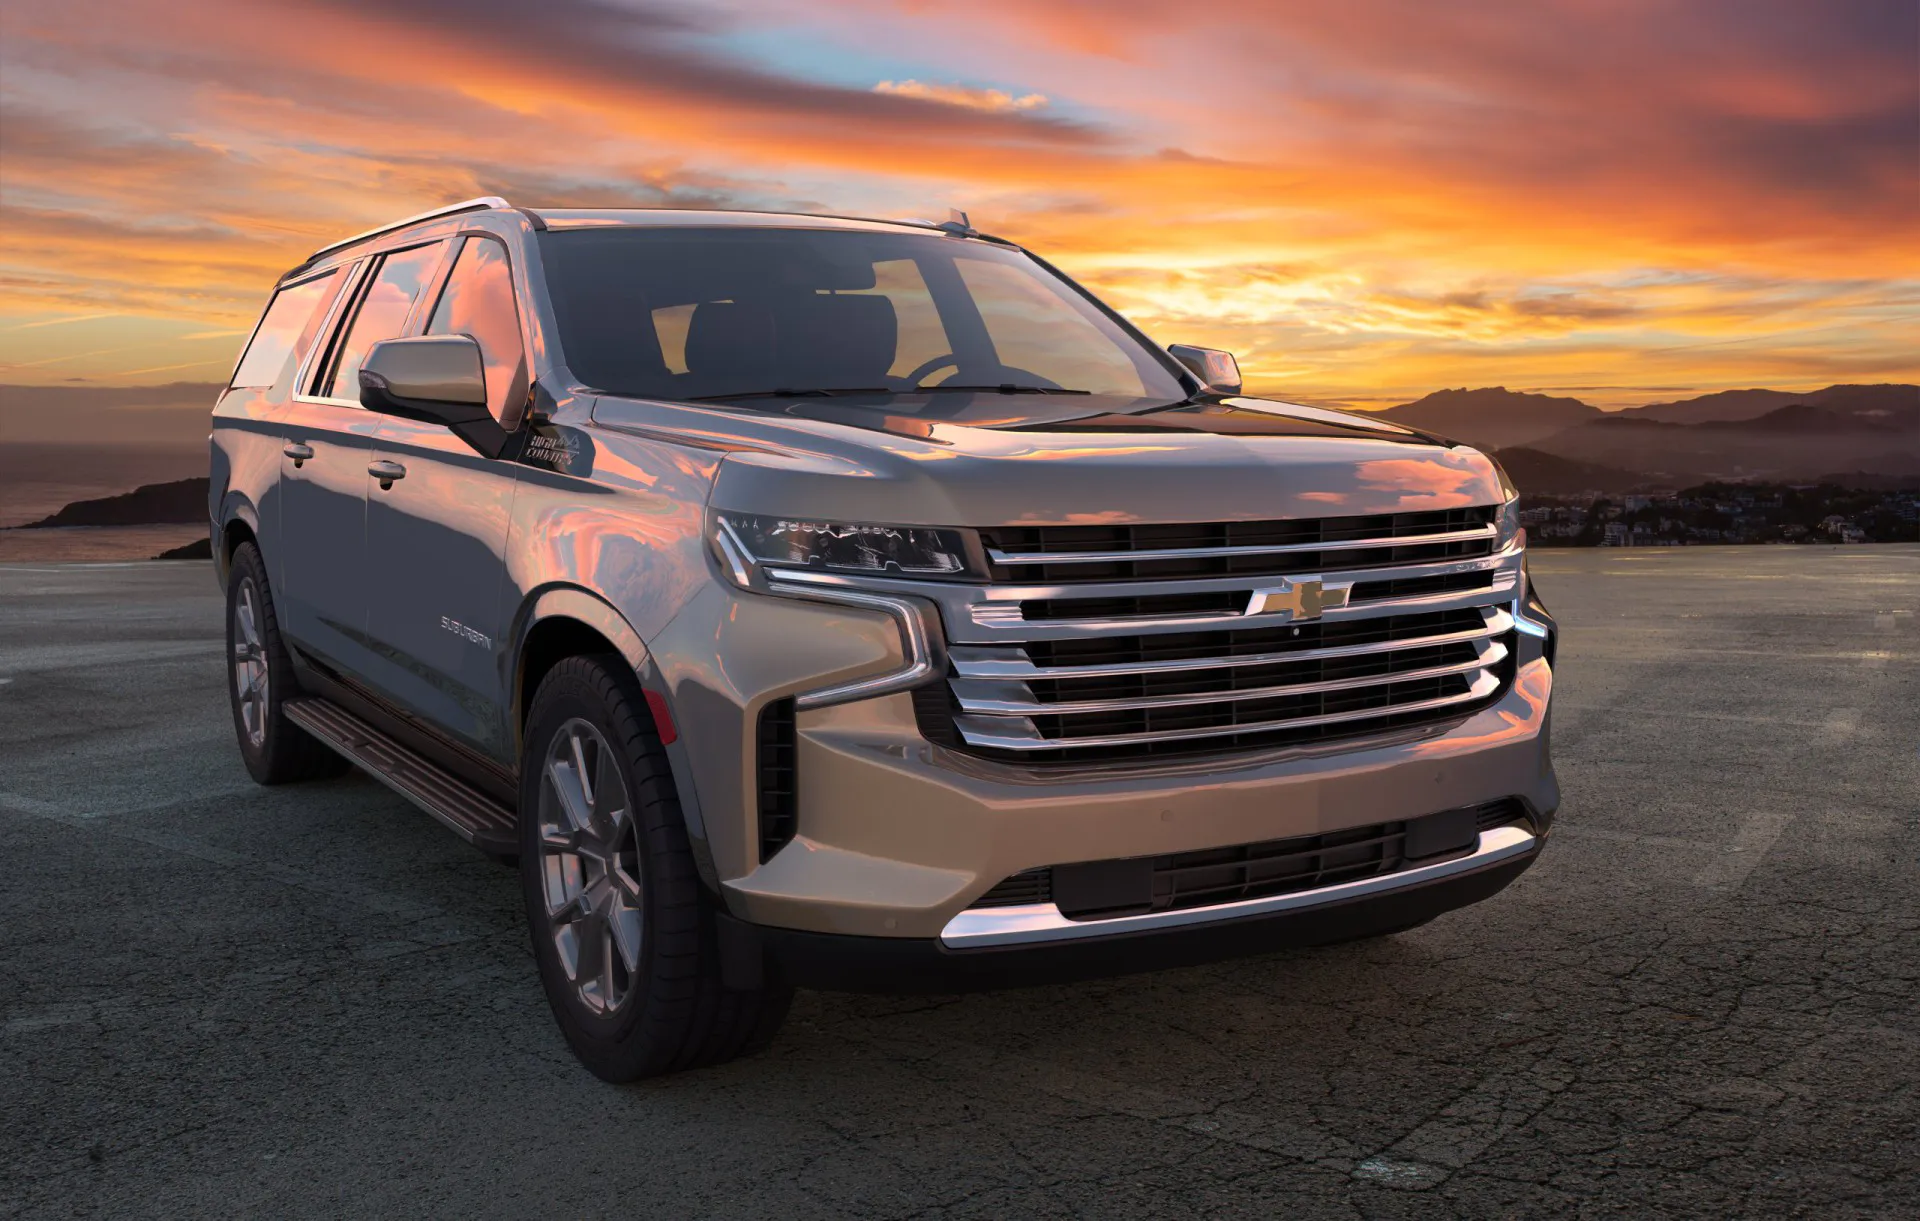 Chevrolet Suburban.Large Family SUV with a sunset background